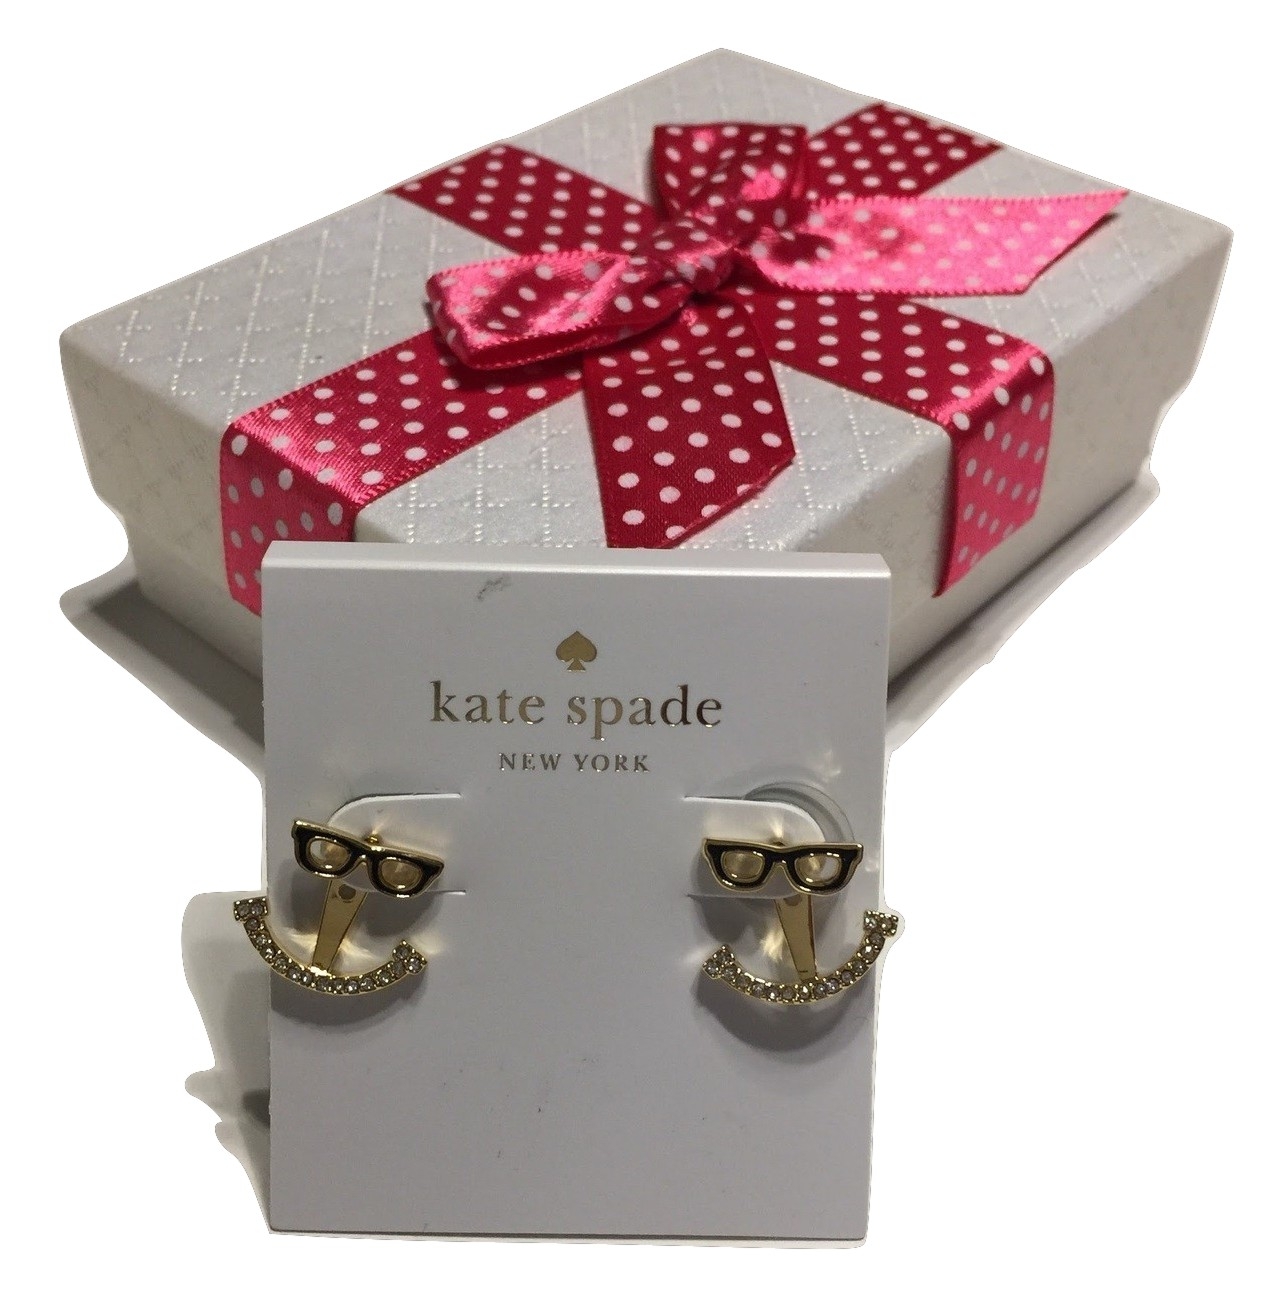 Kate Spade New York Stud Earrings with Bagity Gift Box (Sunglass Anchor)